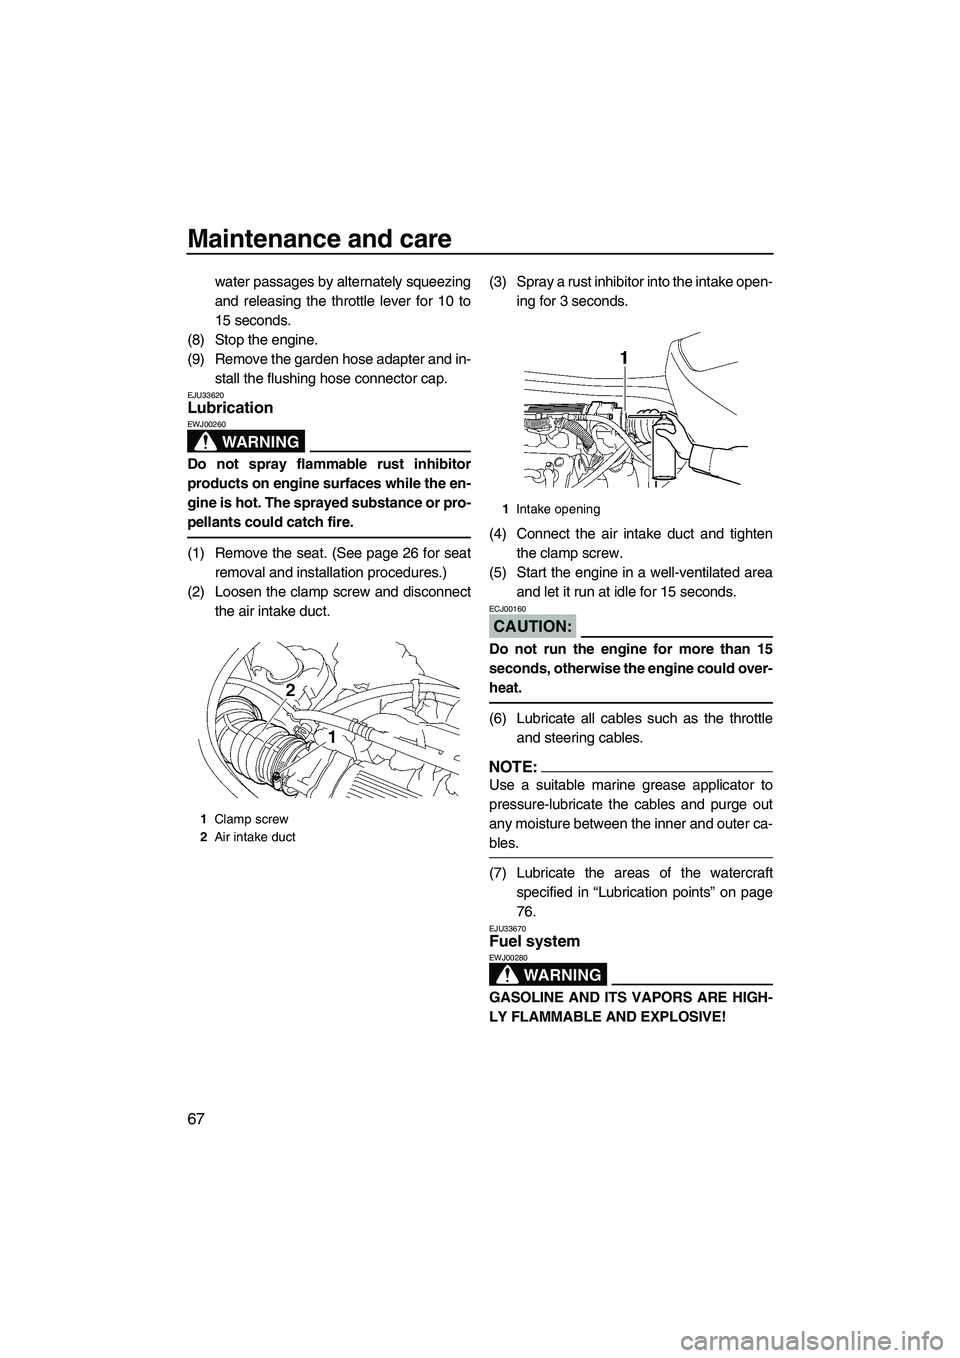 YAMAHA VX SPORT 2007  Owners Manual Maintenance and care
67
water passages by alternately squeezing
and releasing the throttle lever for 10 to
15 seconds.
(8) Stop the engine.
(9) Remove the garden hose adapter and in-
stall the flushin